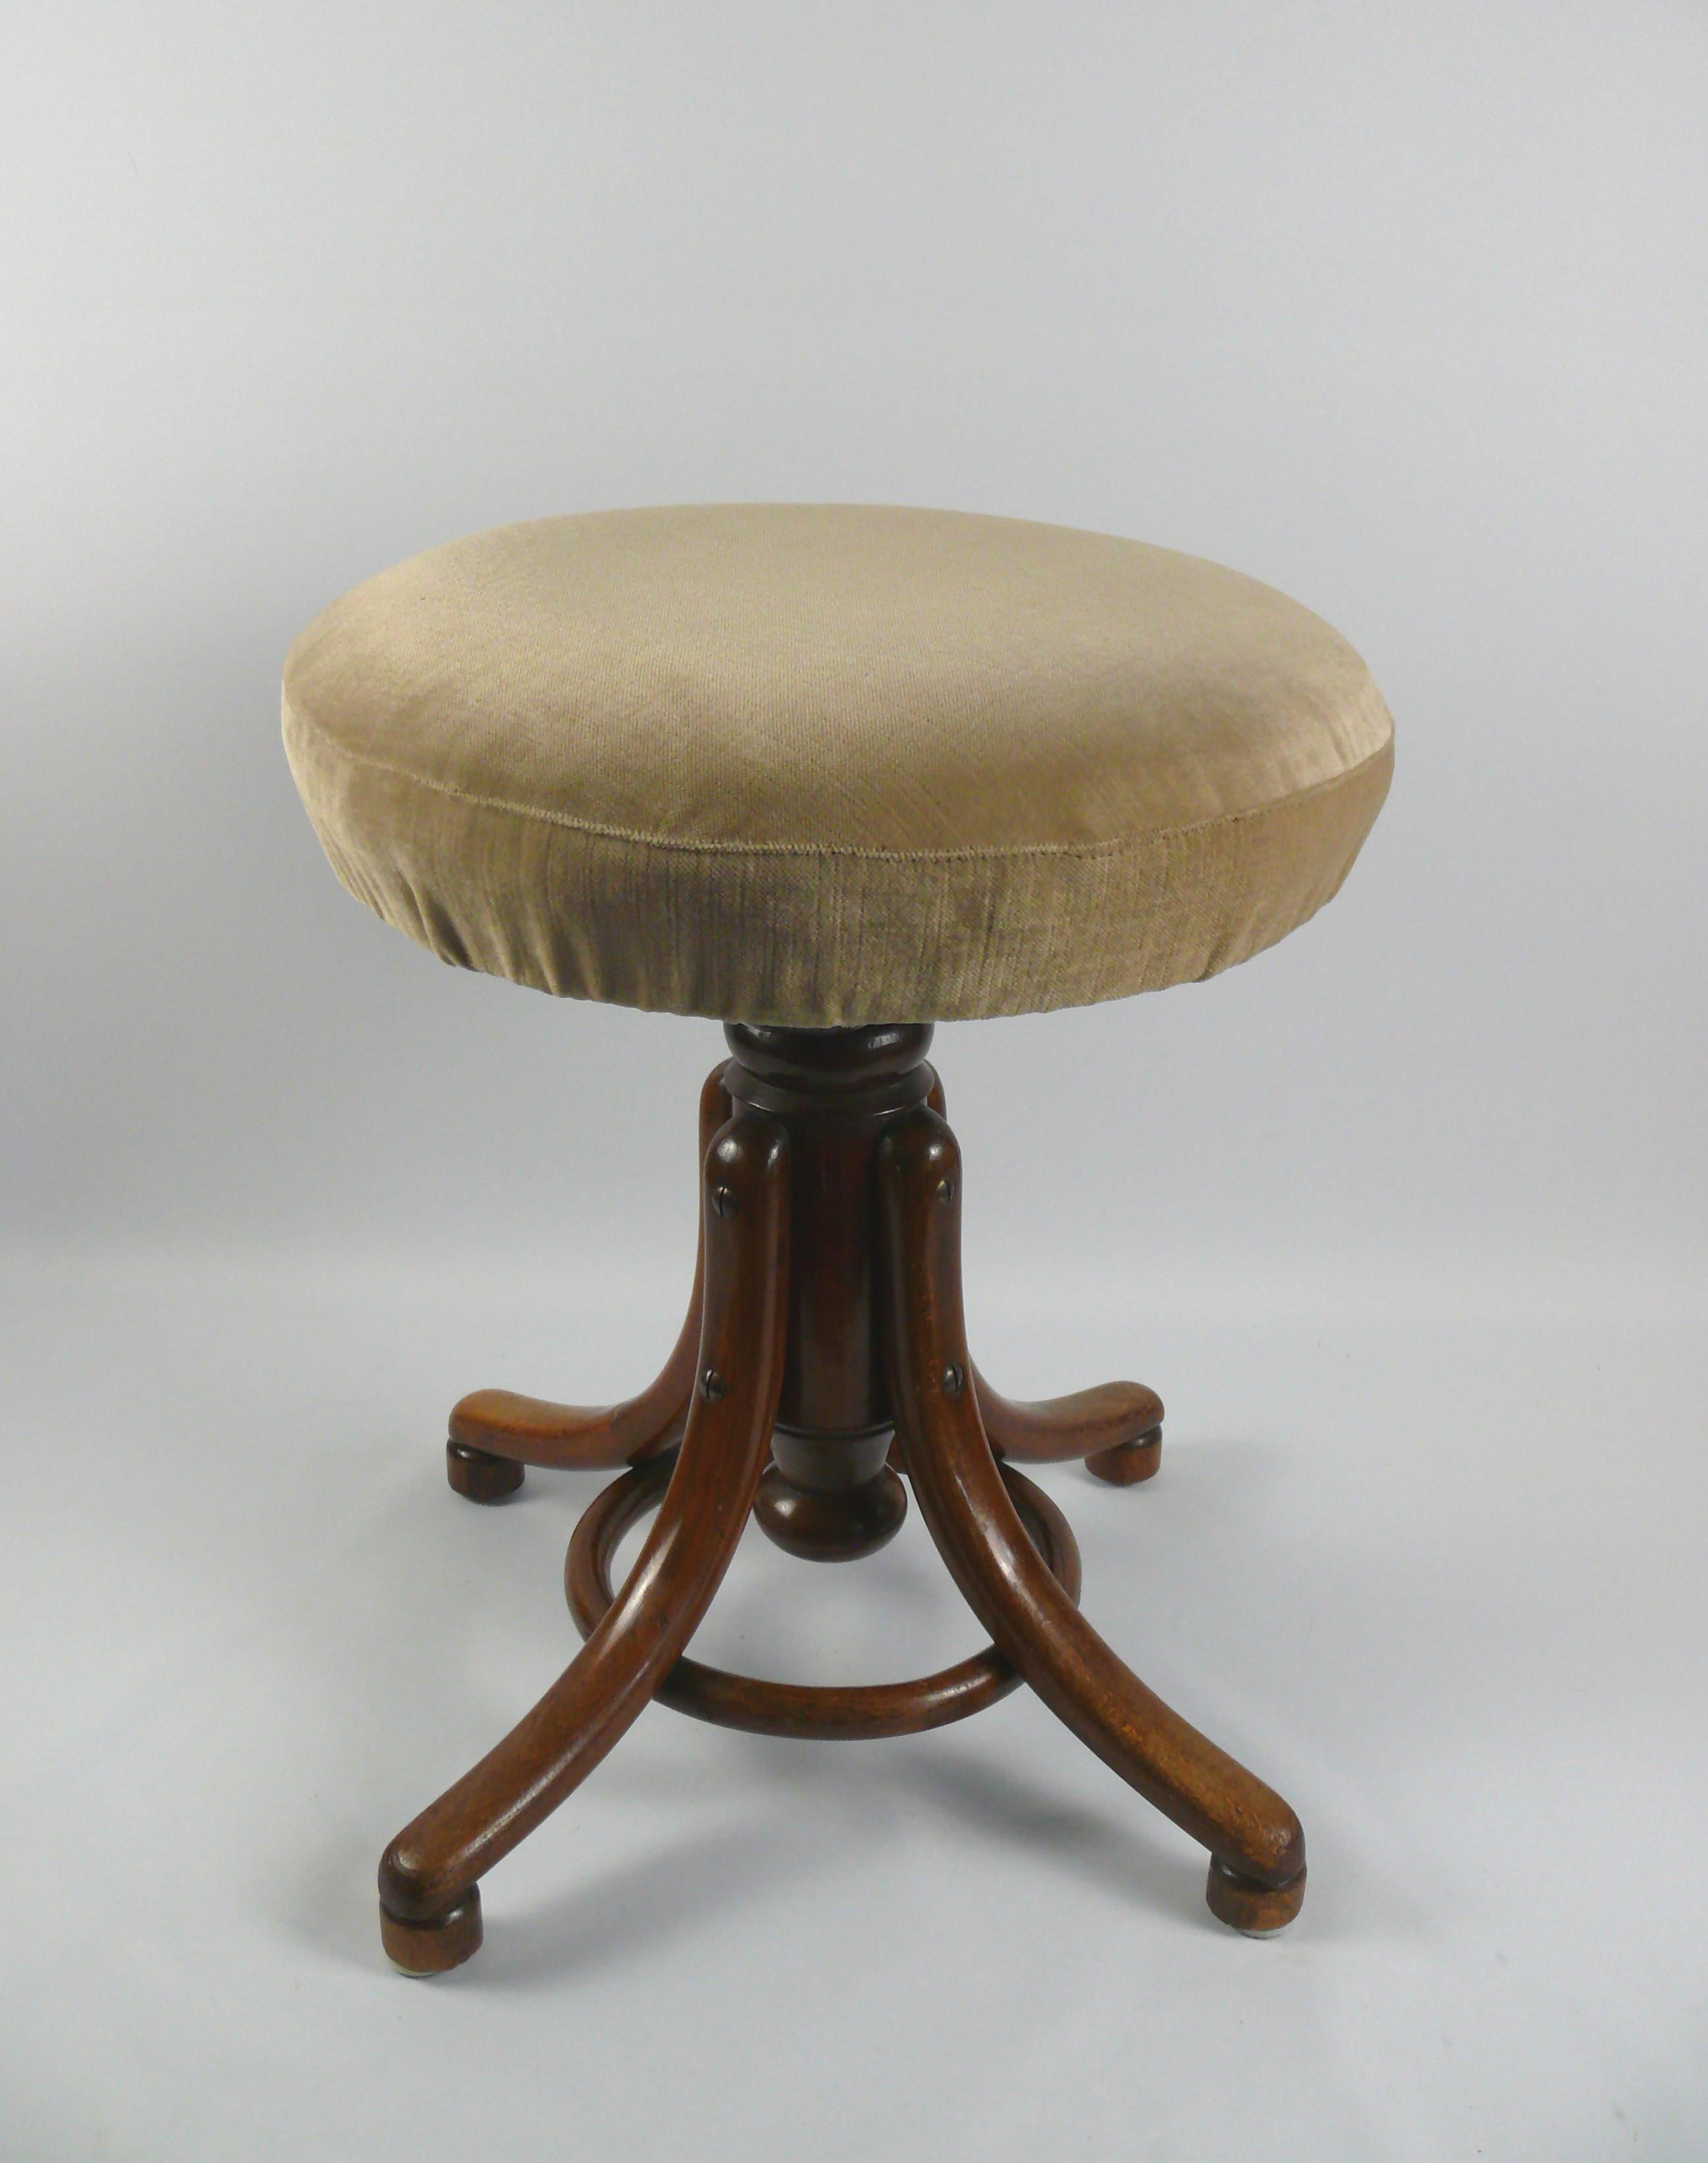 Swivel stool No.1 from the traditional company Gebrüder Thonet, Vienna from the late 19th century. The piano stool is made of lacquered wood (shellac) and has a frame with a bentwood ring. The curved feet are held together by the wooden ring made of